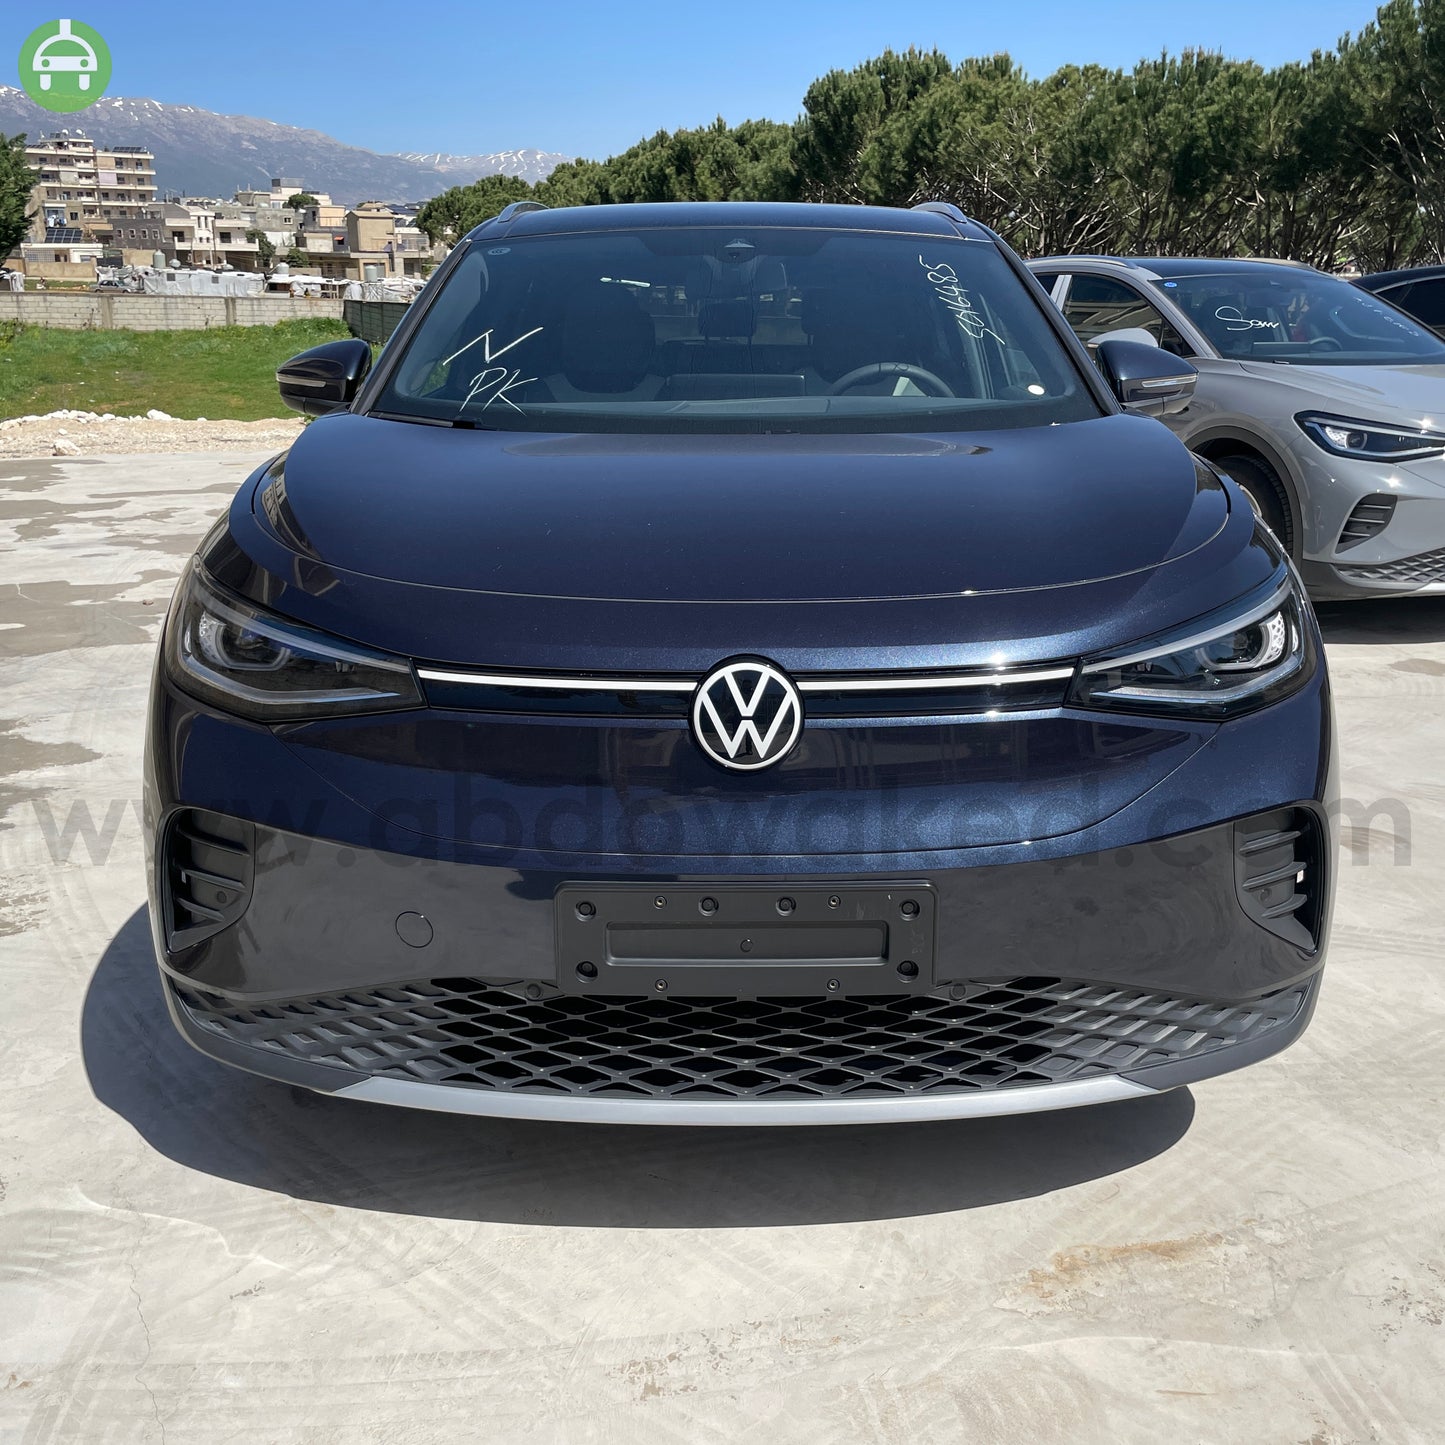 VW ID4 Crozz Pure+ 2022 Dark Blue Color 550km Range/Charge Fully Electric Car (New - 0KM)